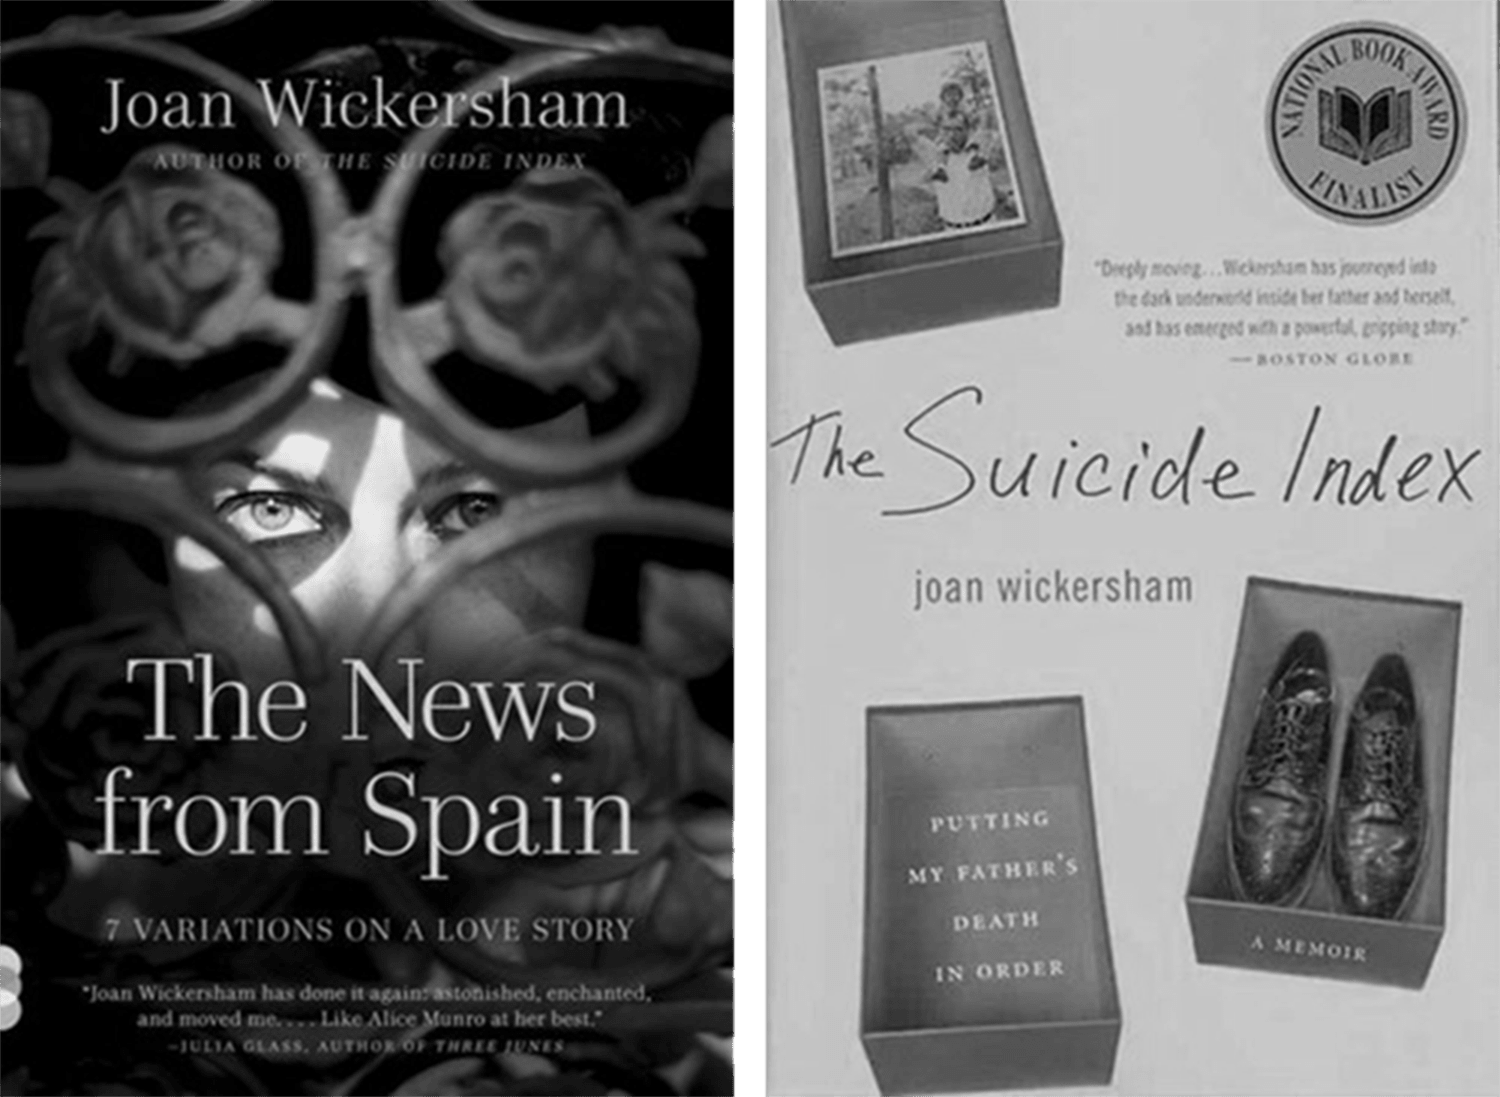 Paperback covers of Joan Wickersham's books, The News from Spain and The Suicide Index.